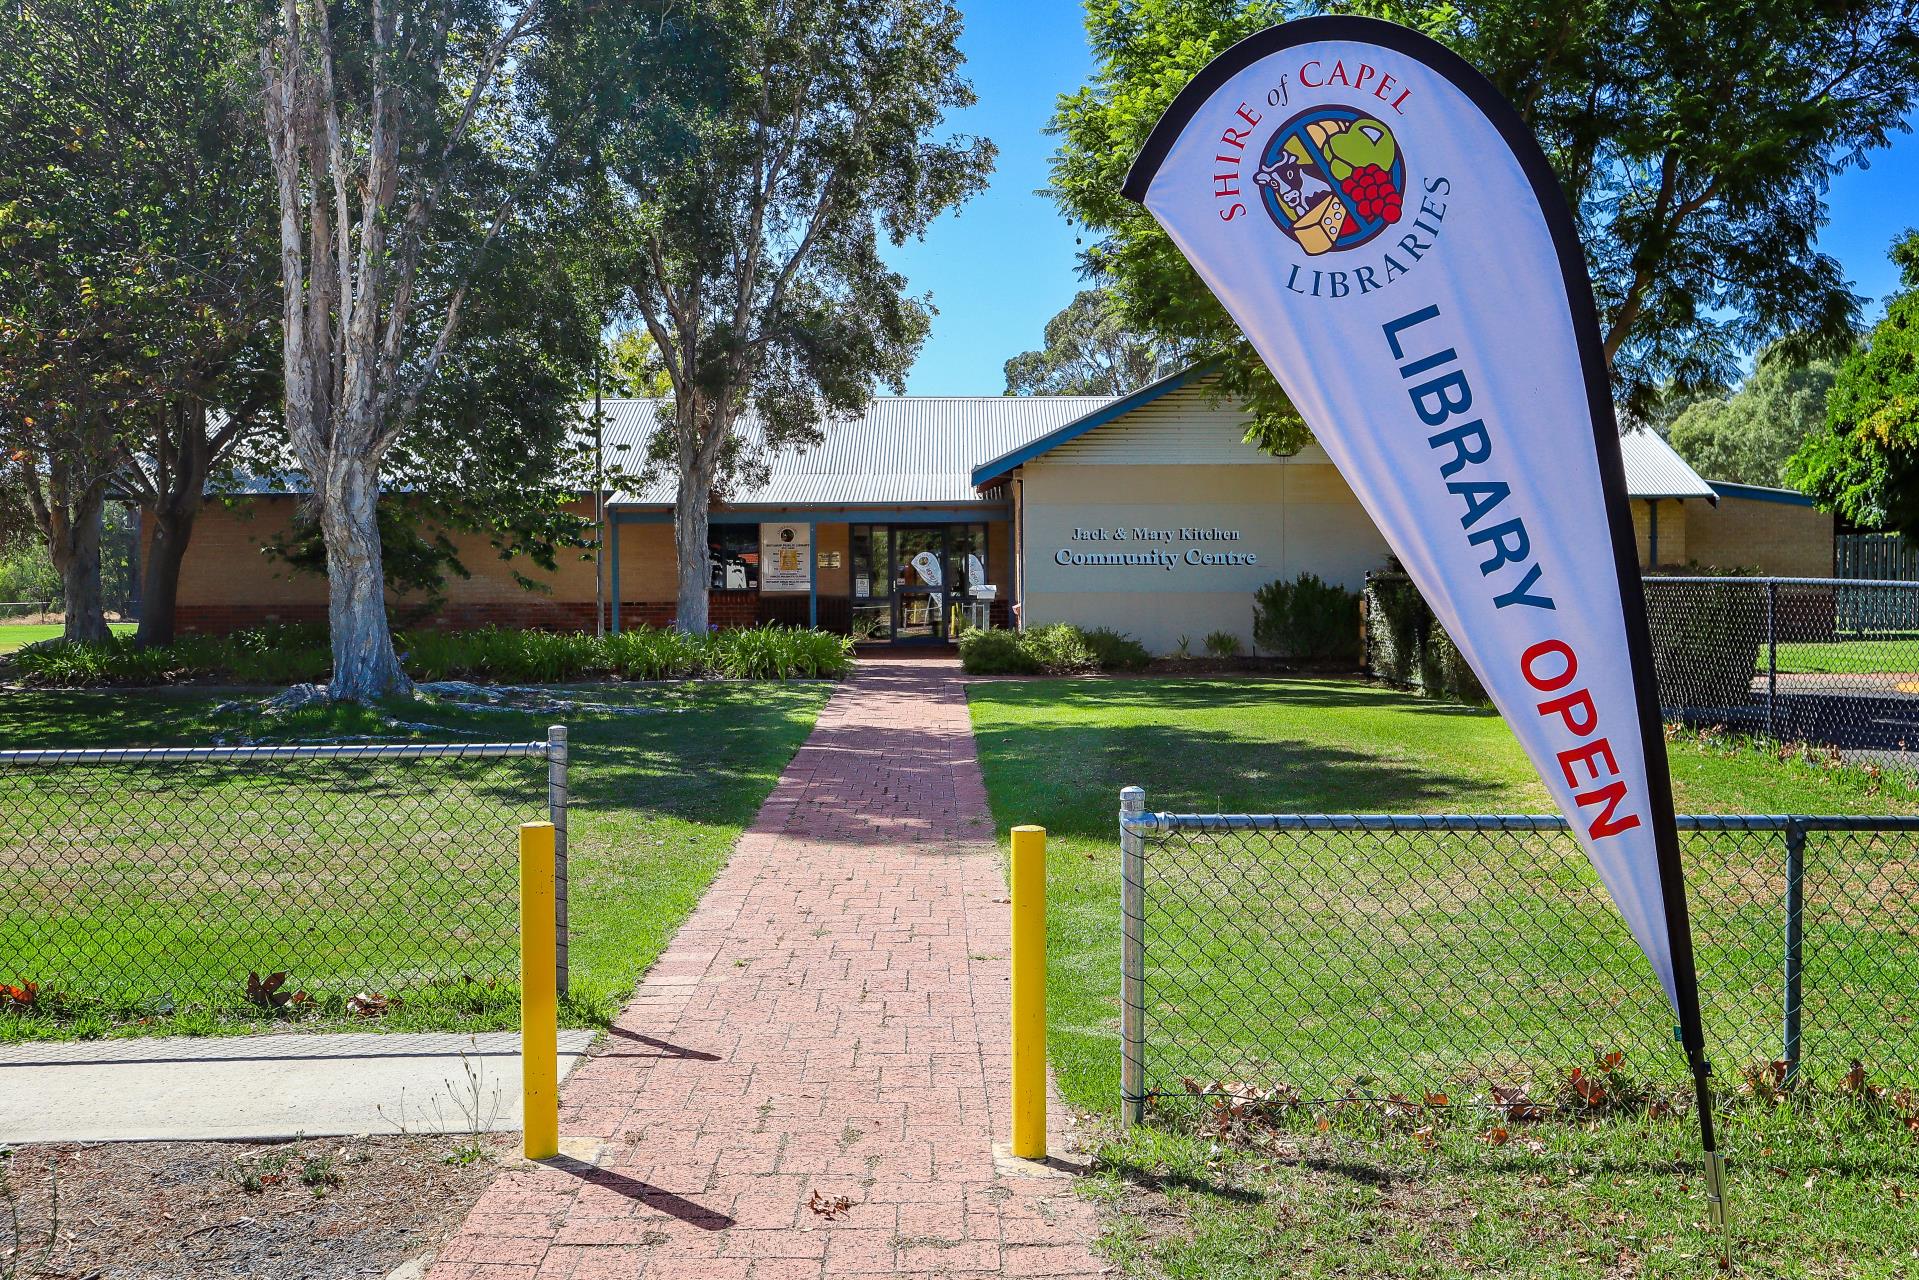 Boyanup Library Building